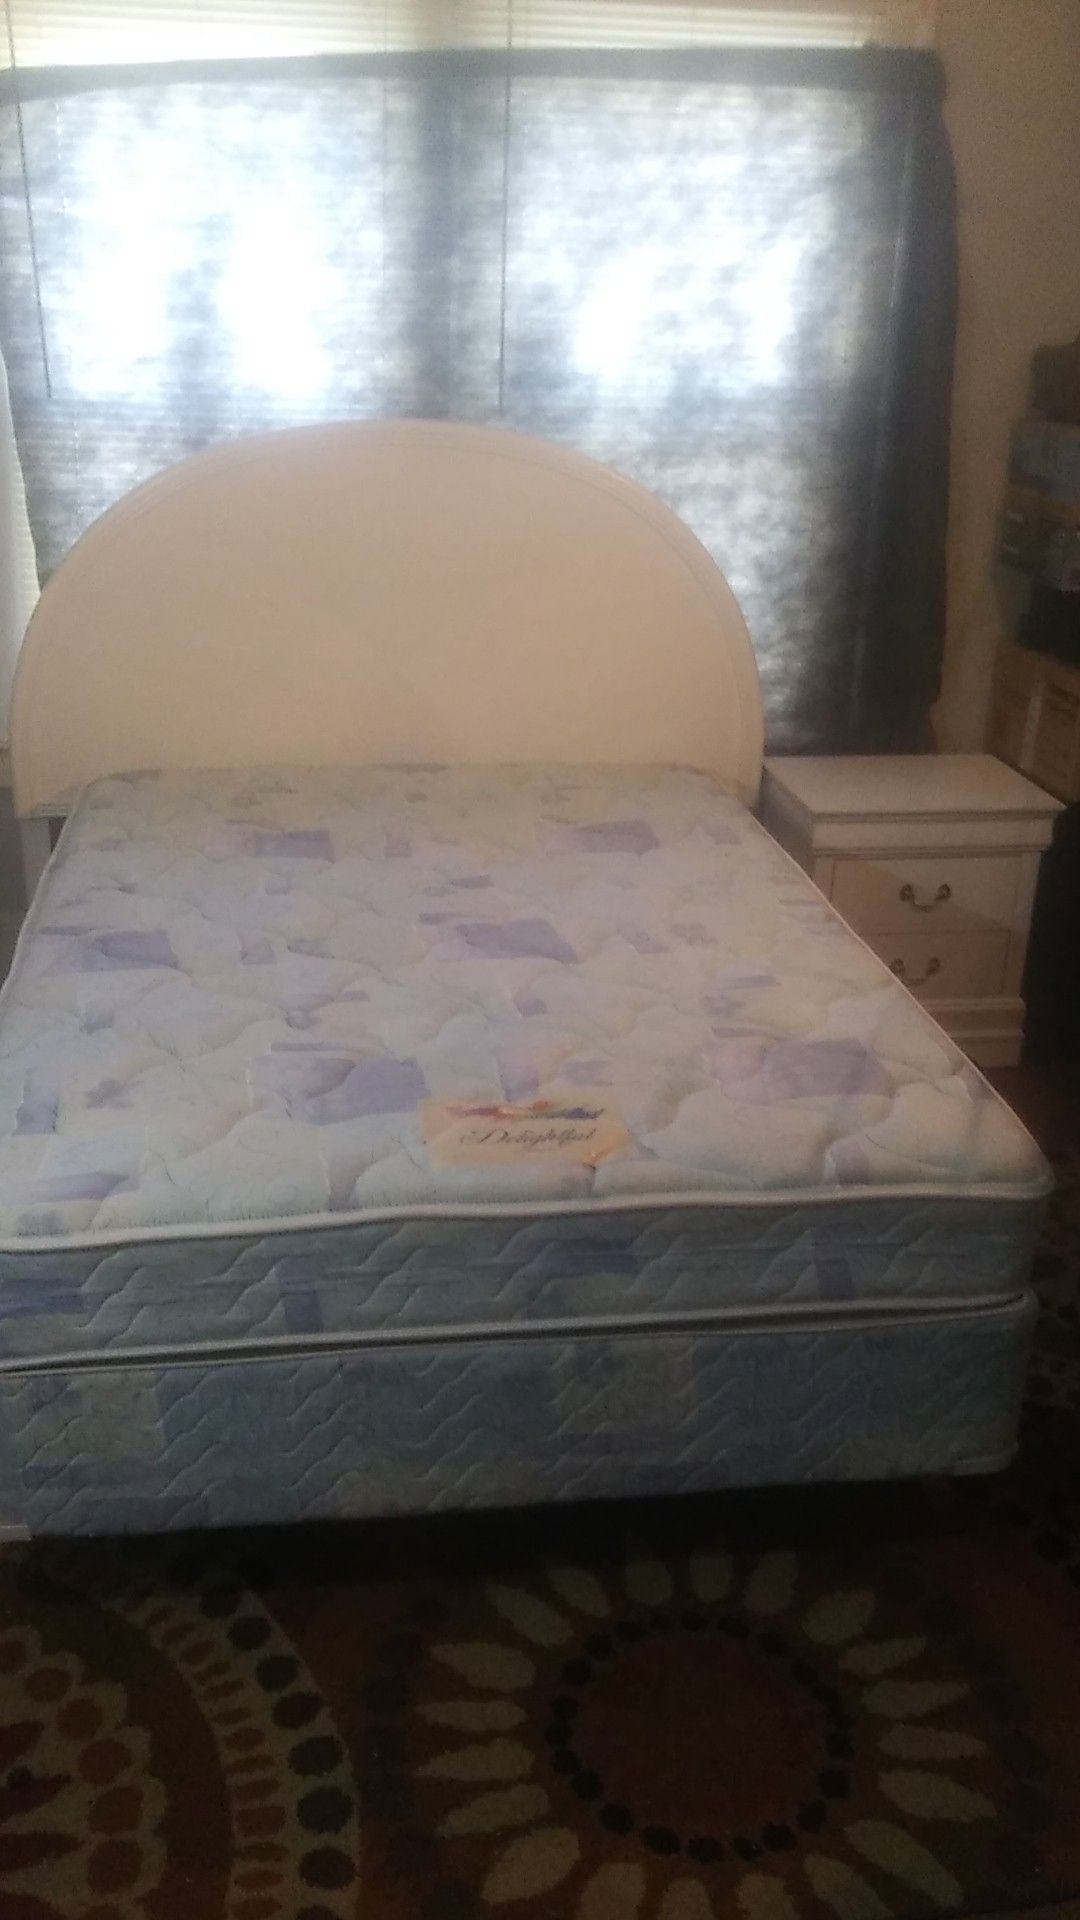 Nice full size bed complete! Headboard, metal frame and Super clean mattress. No stains! Reduced $150 to $125. Better picture on my page.